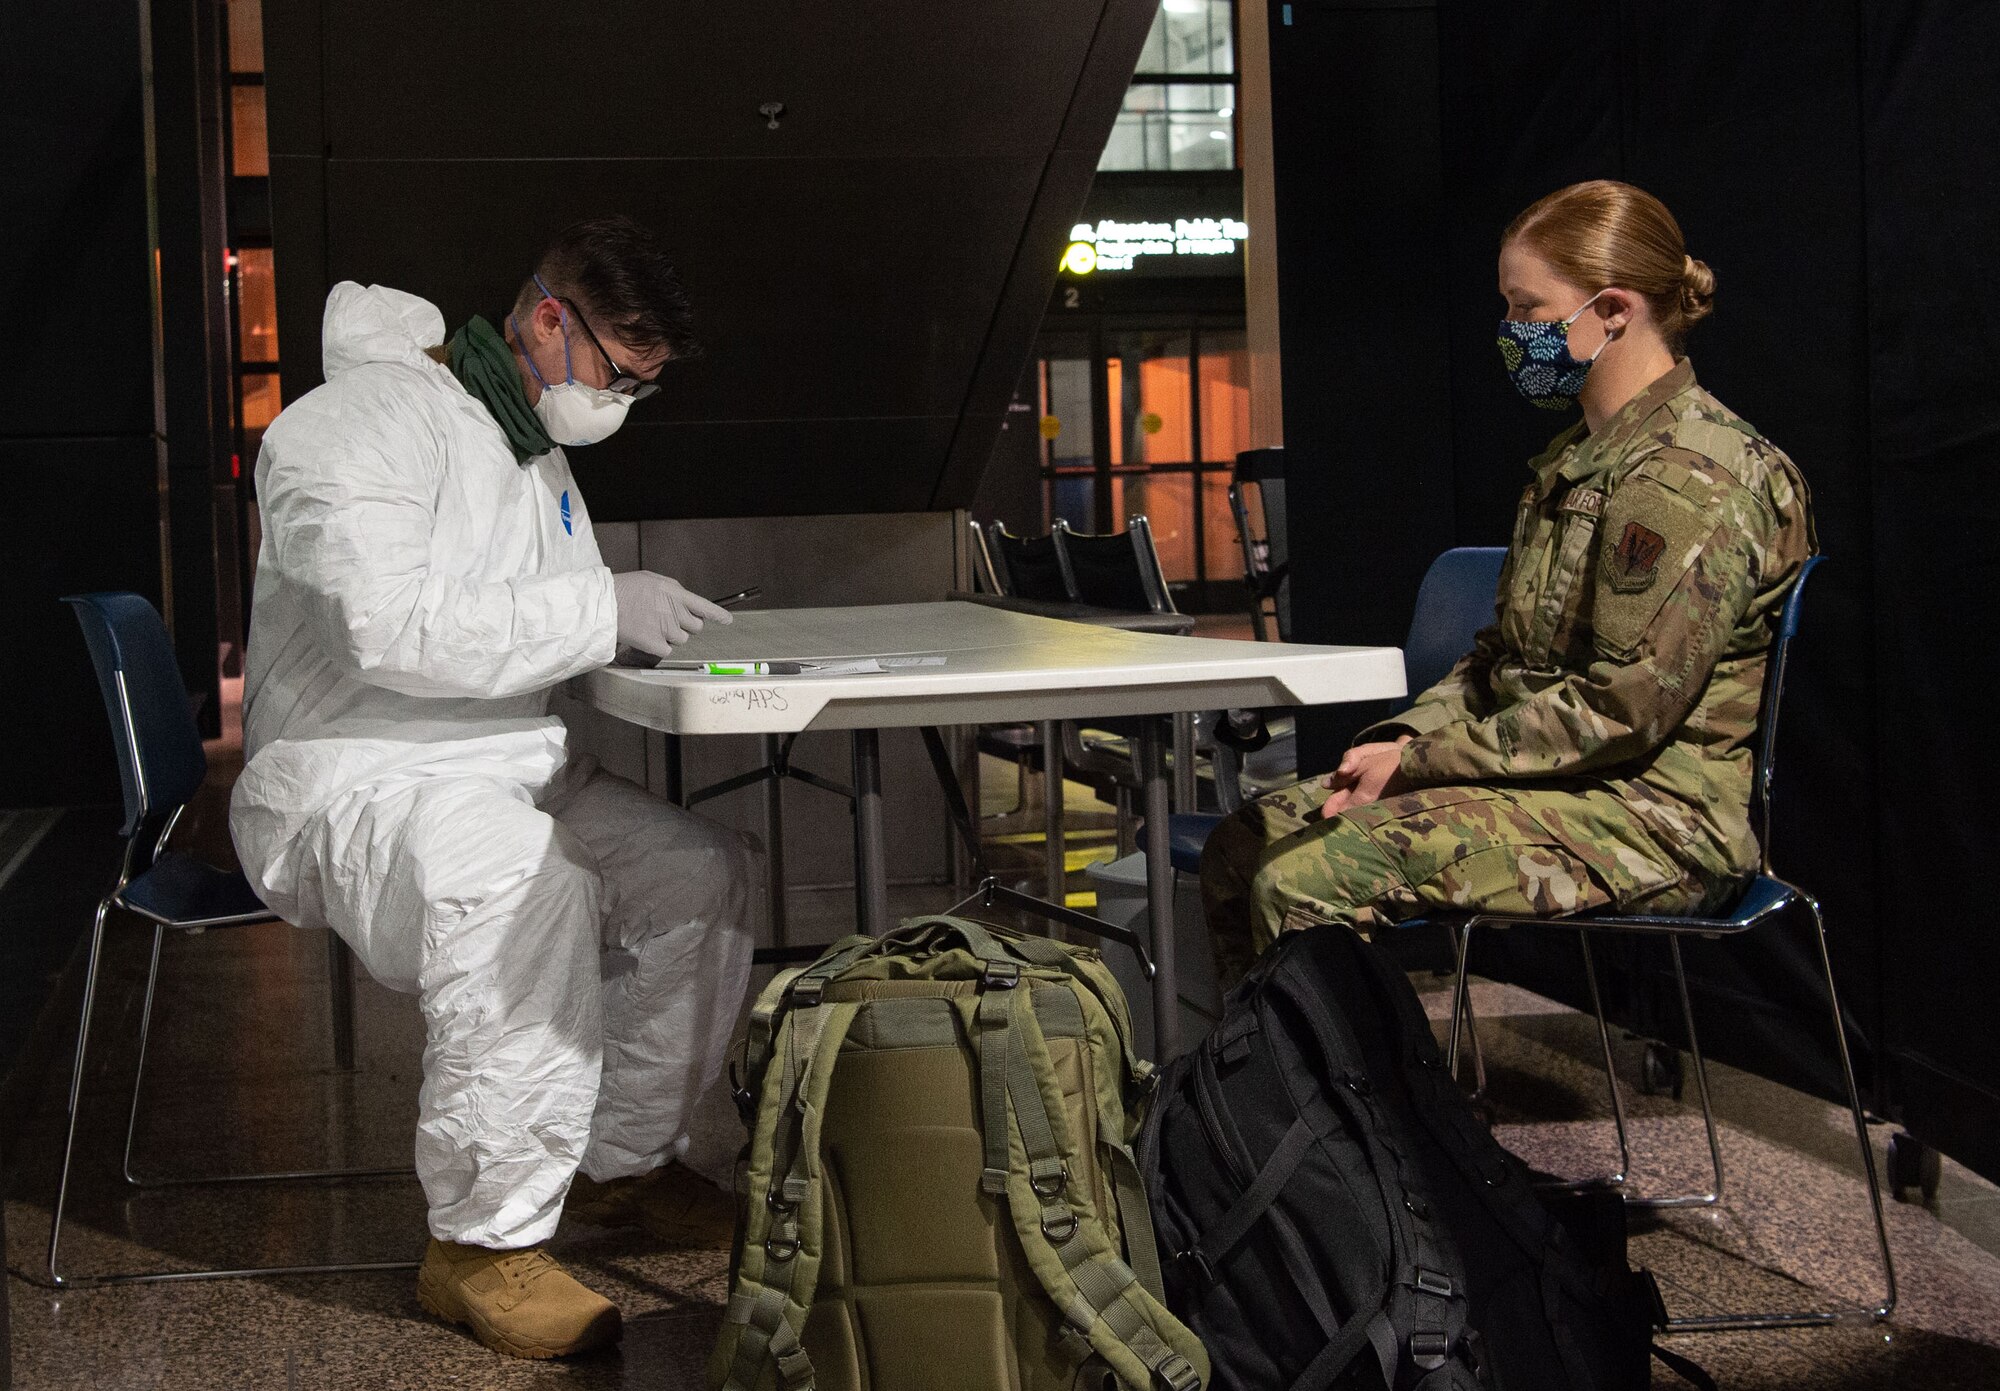 Staff Sgt. Benjamin Guris, 62nd Medical Squadron aerospace medical technician, left, conducts a secondary medical screening on a passenger traveling to Asia at the Seattle-Tacoma International Airport in Seattle, Wash., April 30, 2020. Secondary screenings are conducted for passengers who may be ill or work in a medical facility to ensure they have not contracted COVID-19. (U.S. Air Force photo by Senior Airman Tryphena Mayhugh)